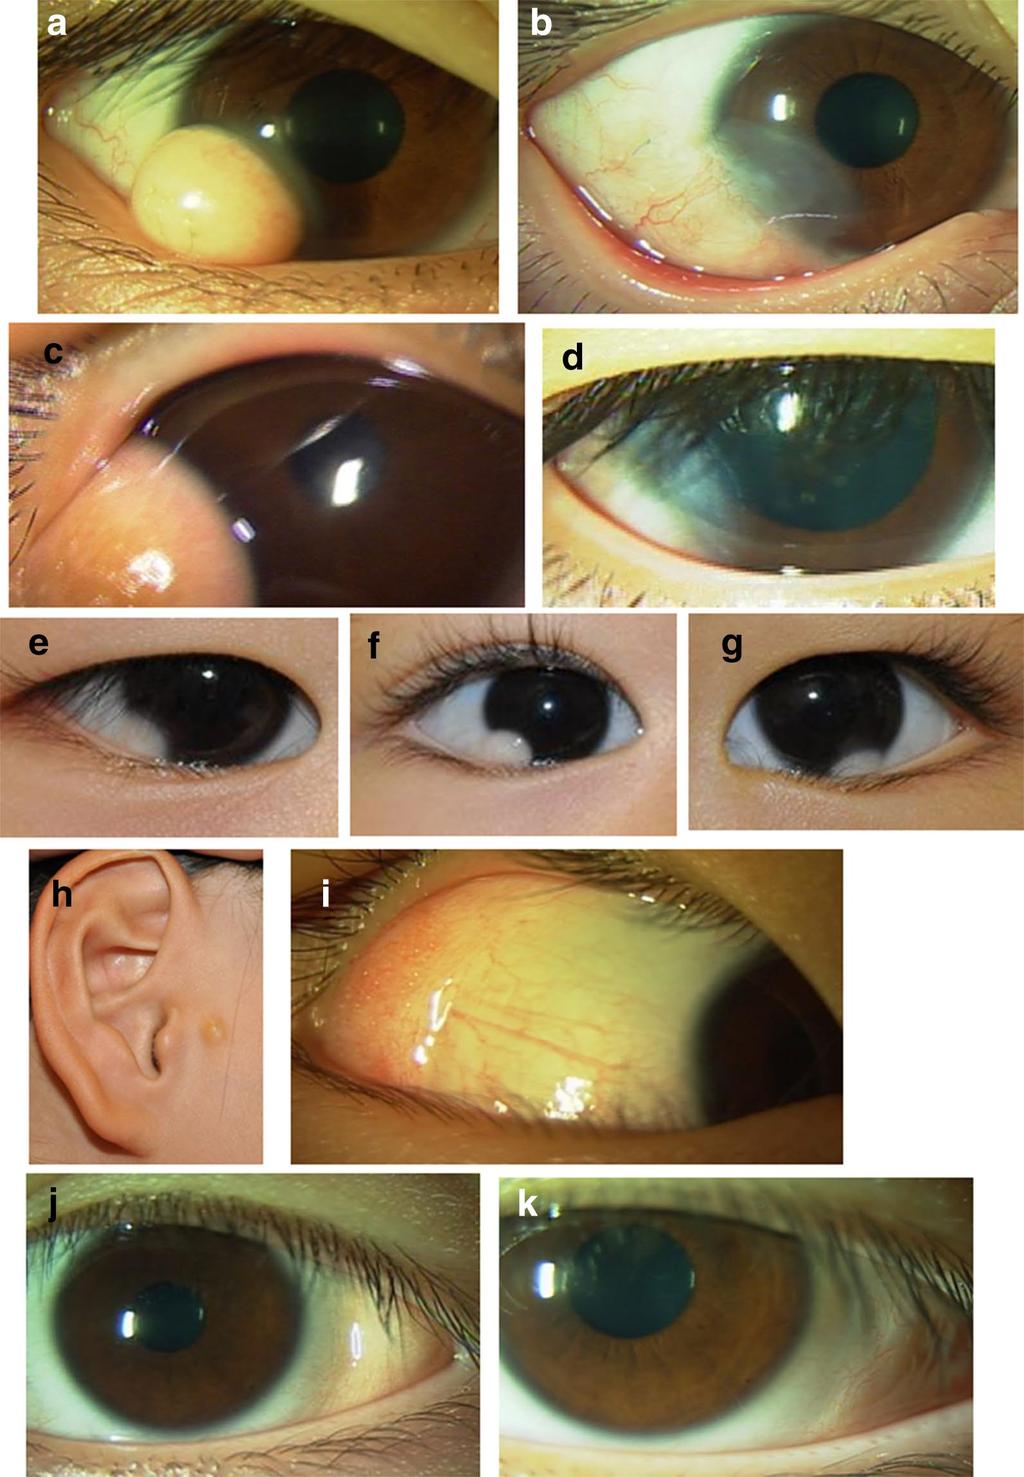 Page 5 of 8 Fig. 1 Case 4 (18-year-old male) with limbal dermoid (a) in the right eye, and 3 months after the resection (b).